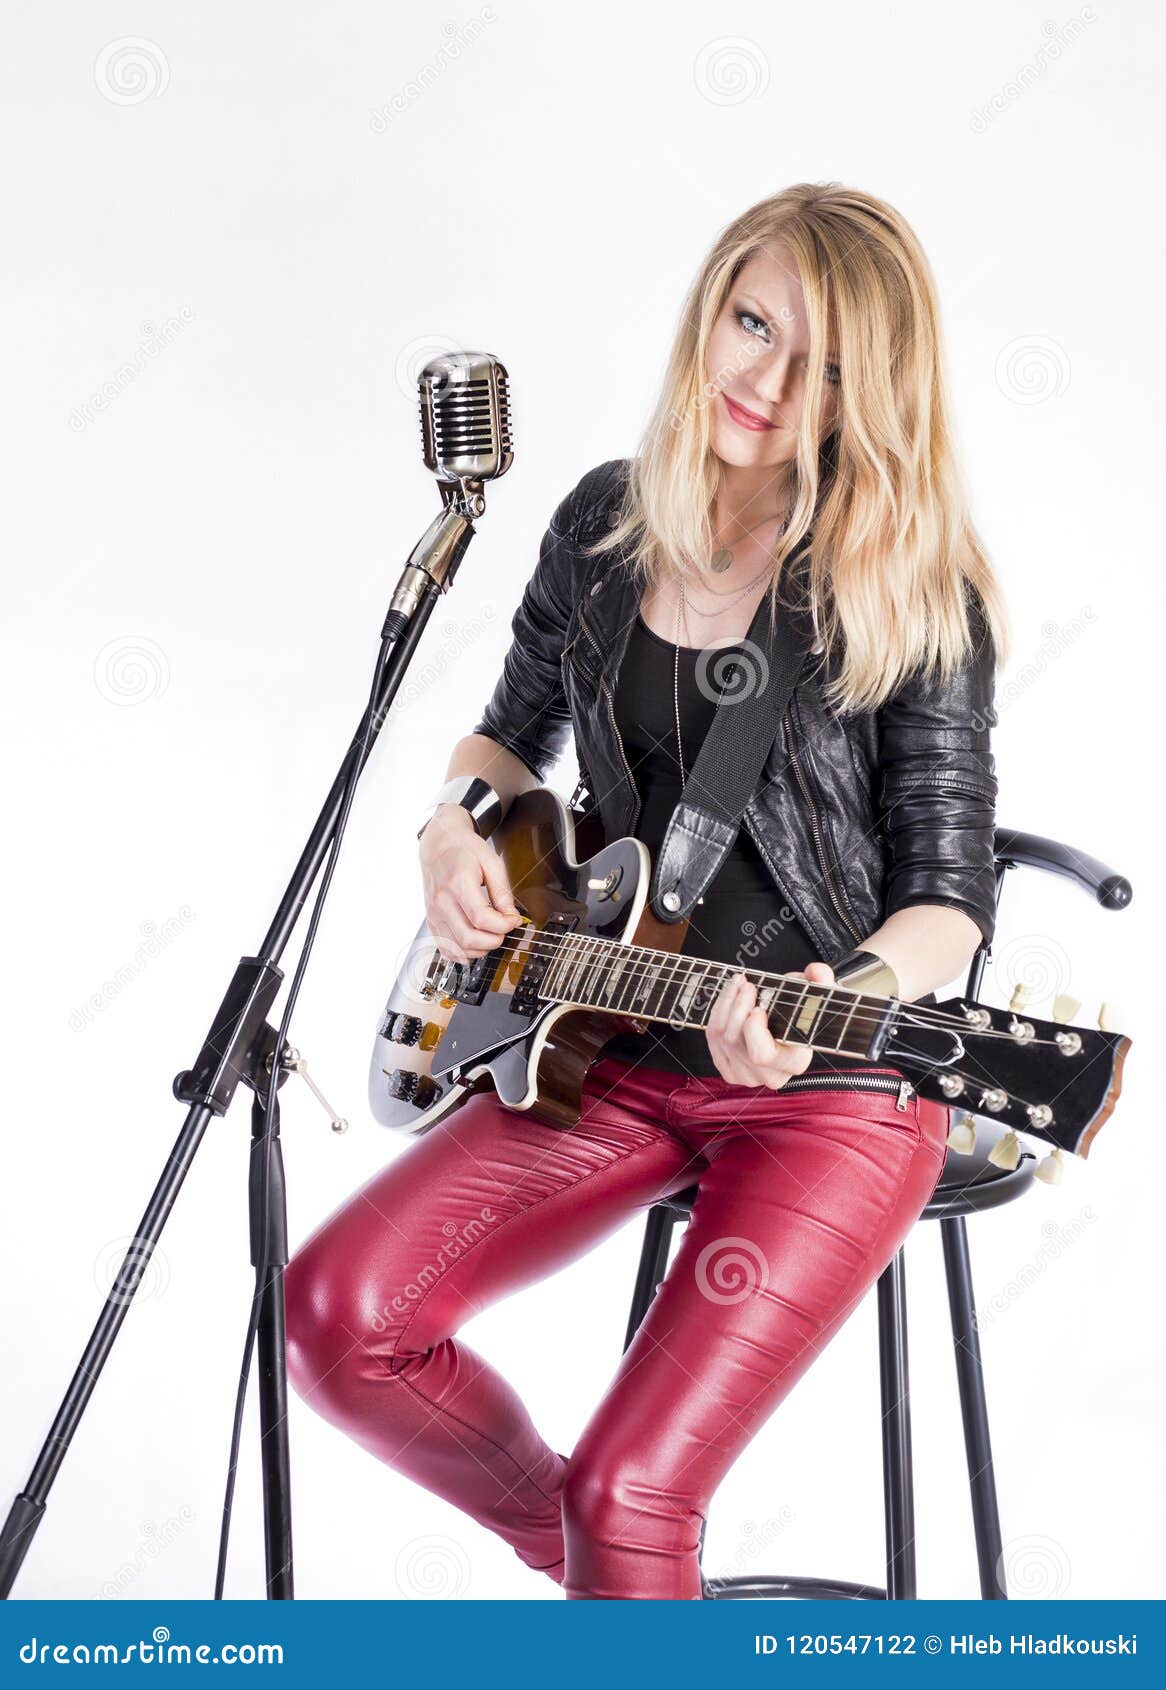 Blonde Girl Guitarist With Electric Guitar Learns Plays Song Sits